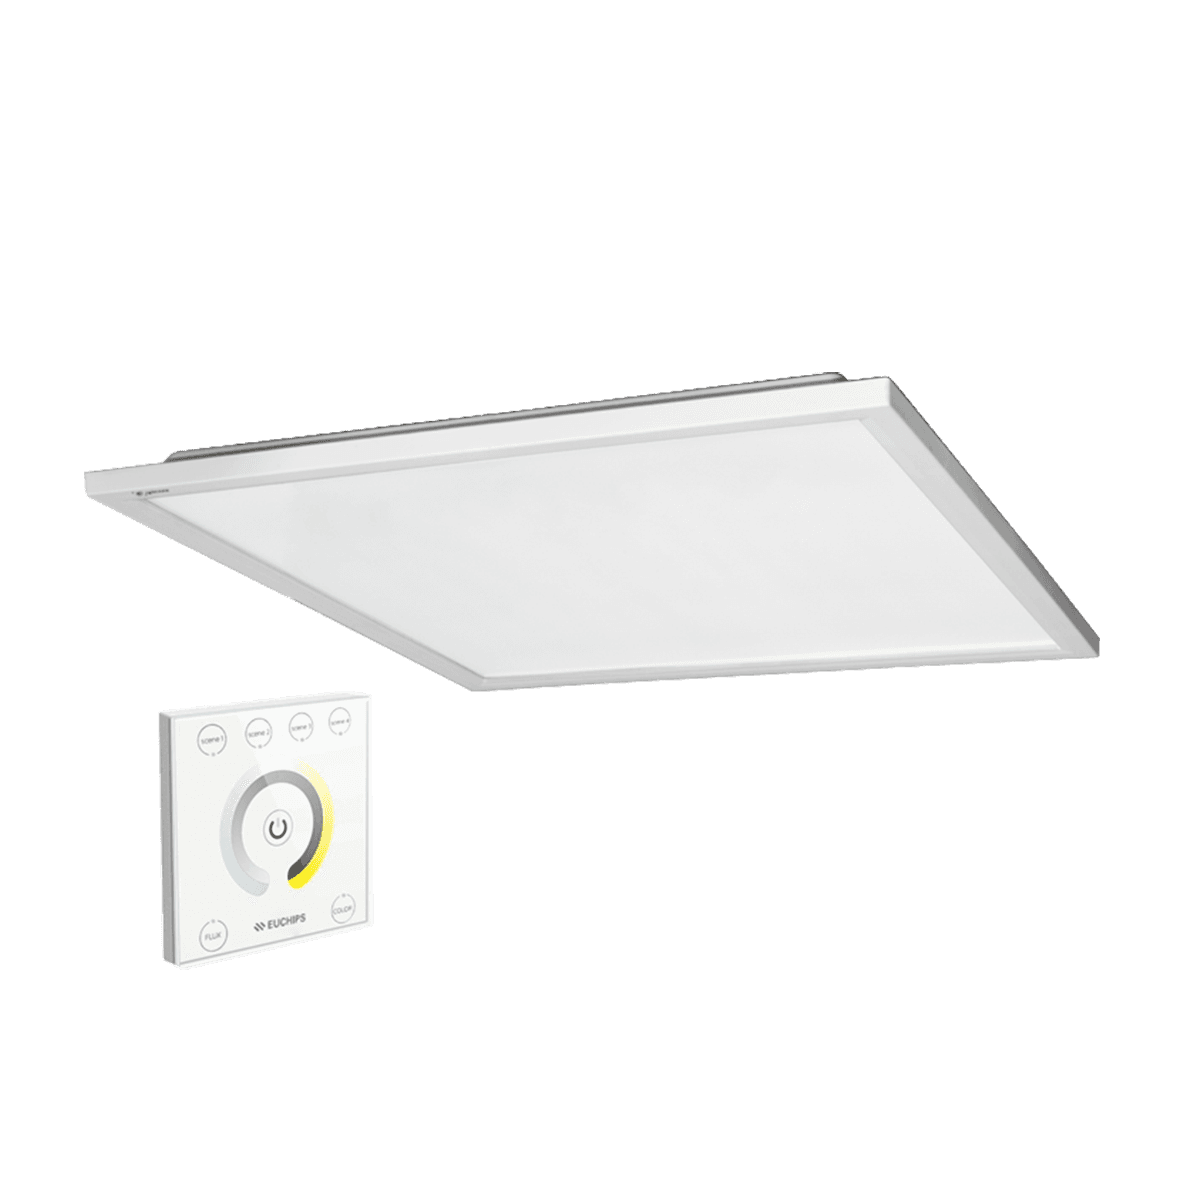 Arshid tunable whtie recessed ceiling